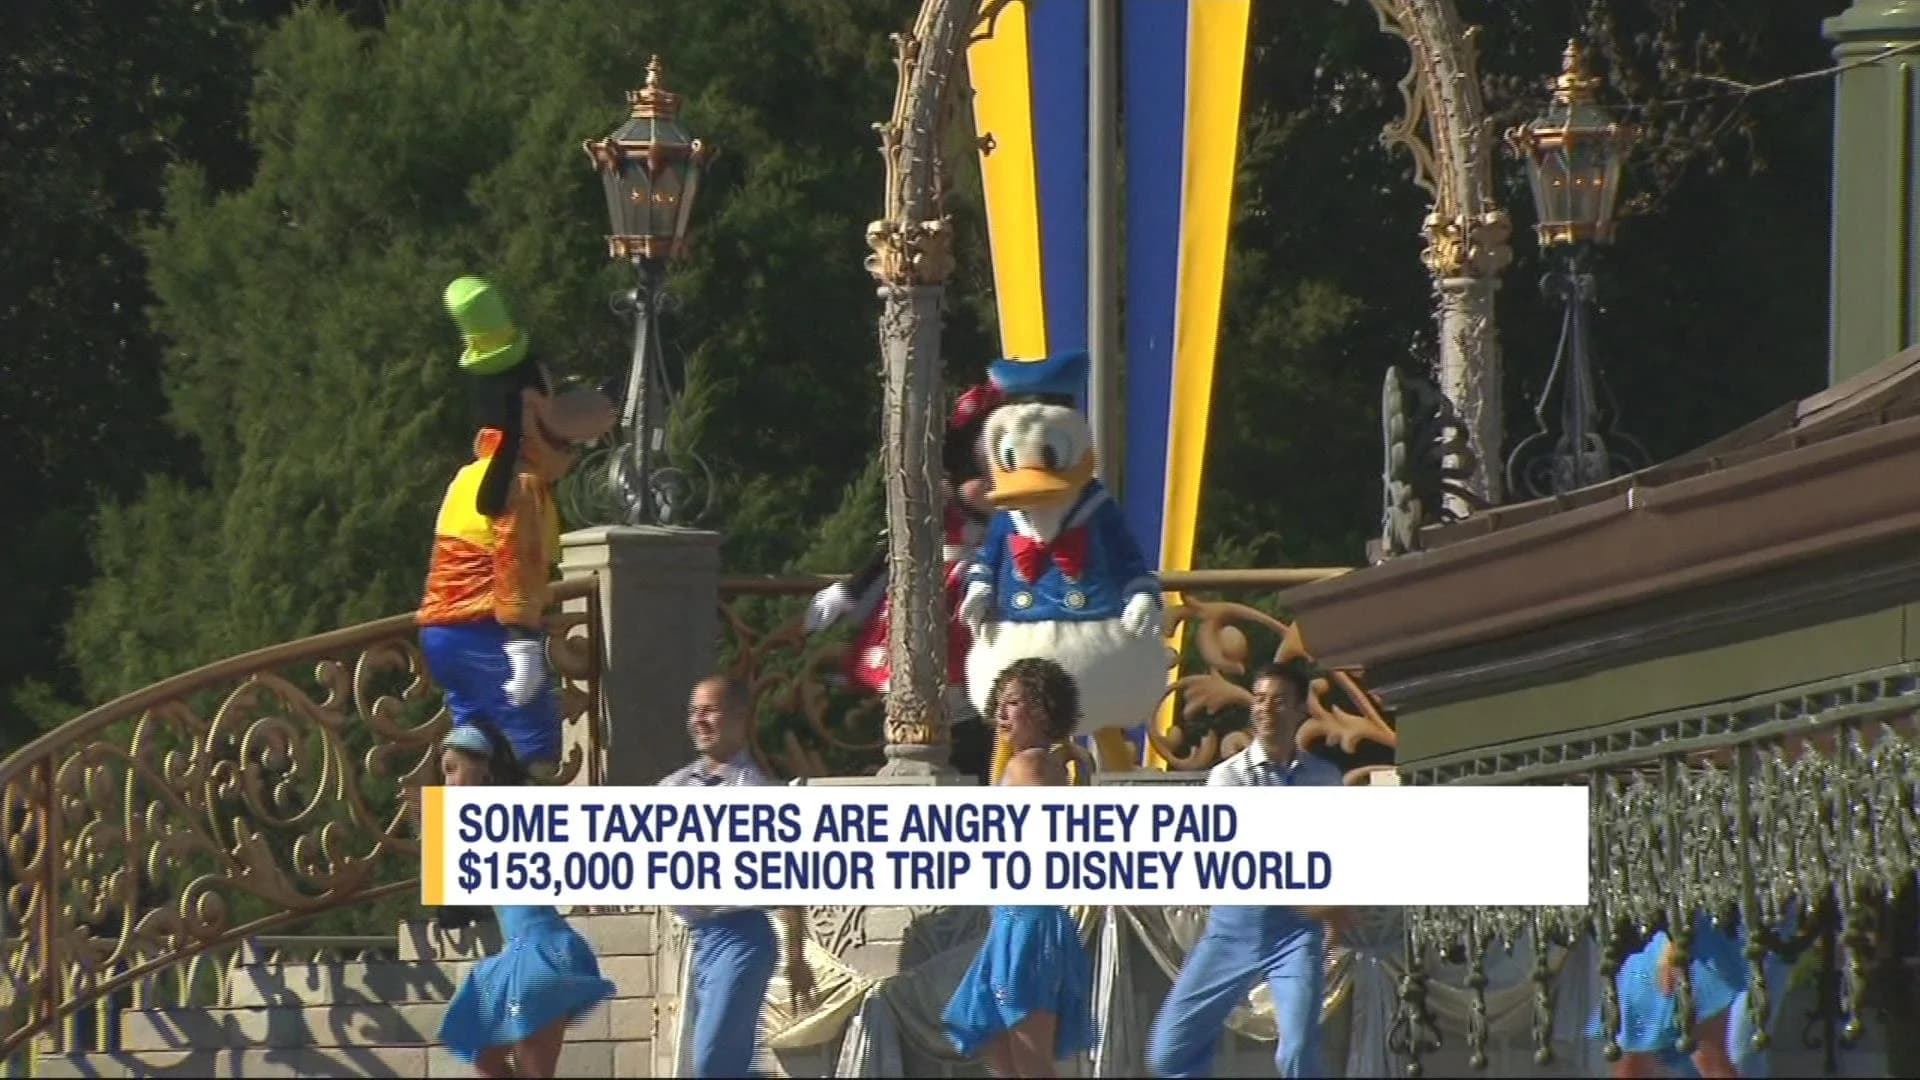 Taxpayers angry after district pays $153K for senior trip to Disney